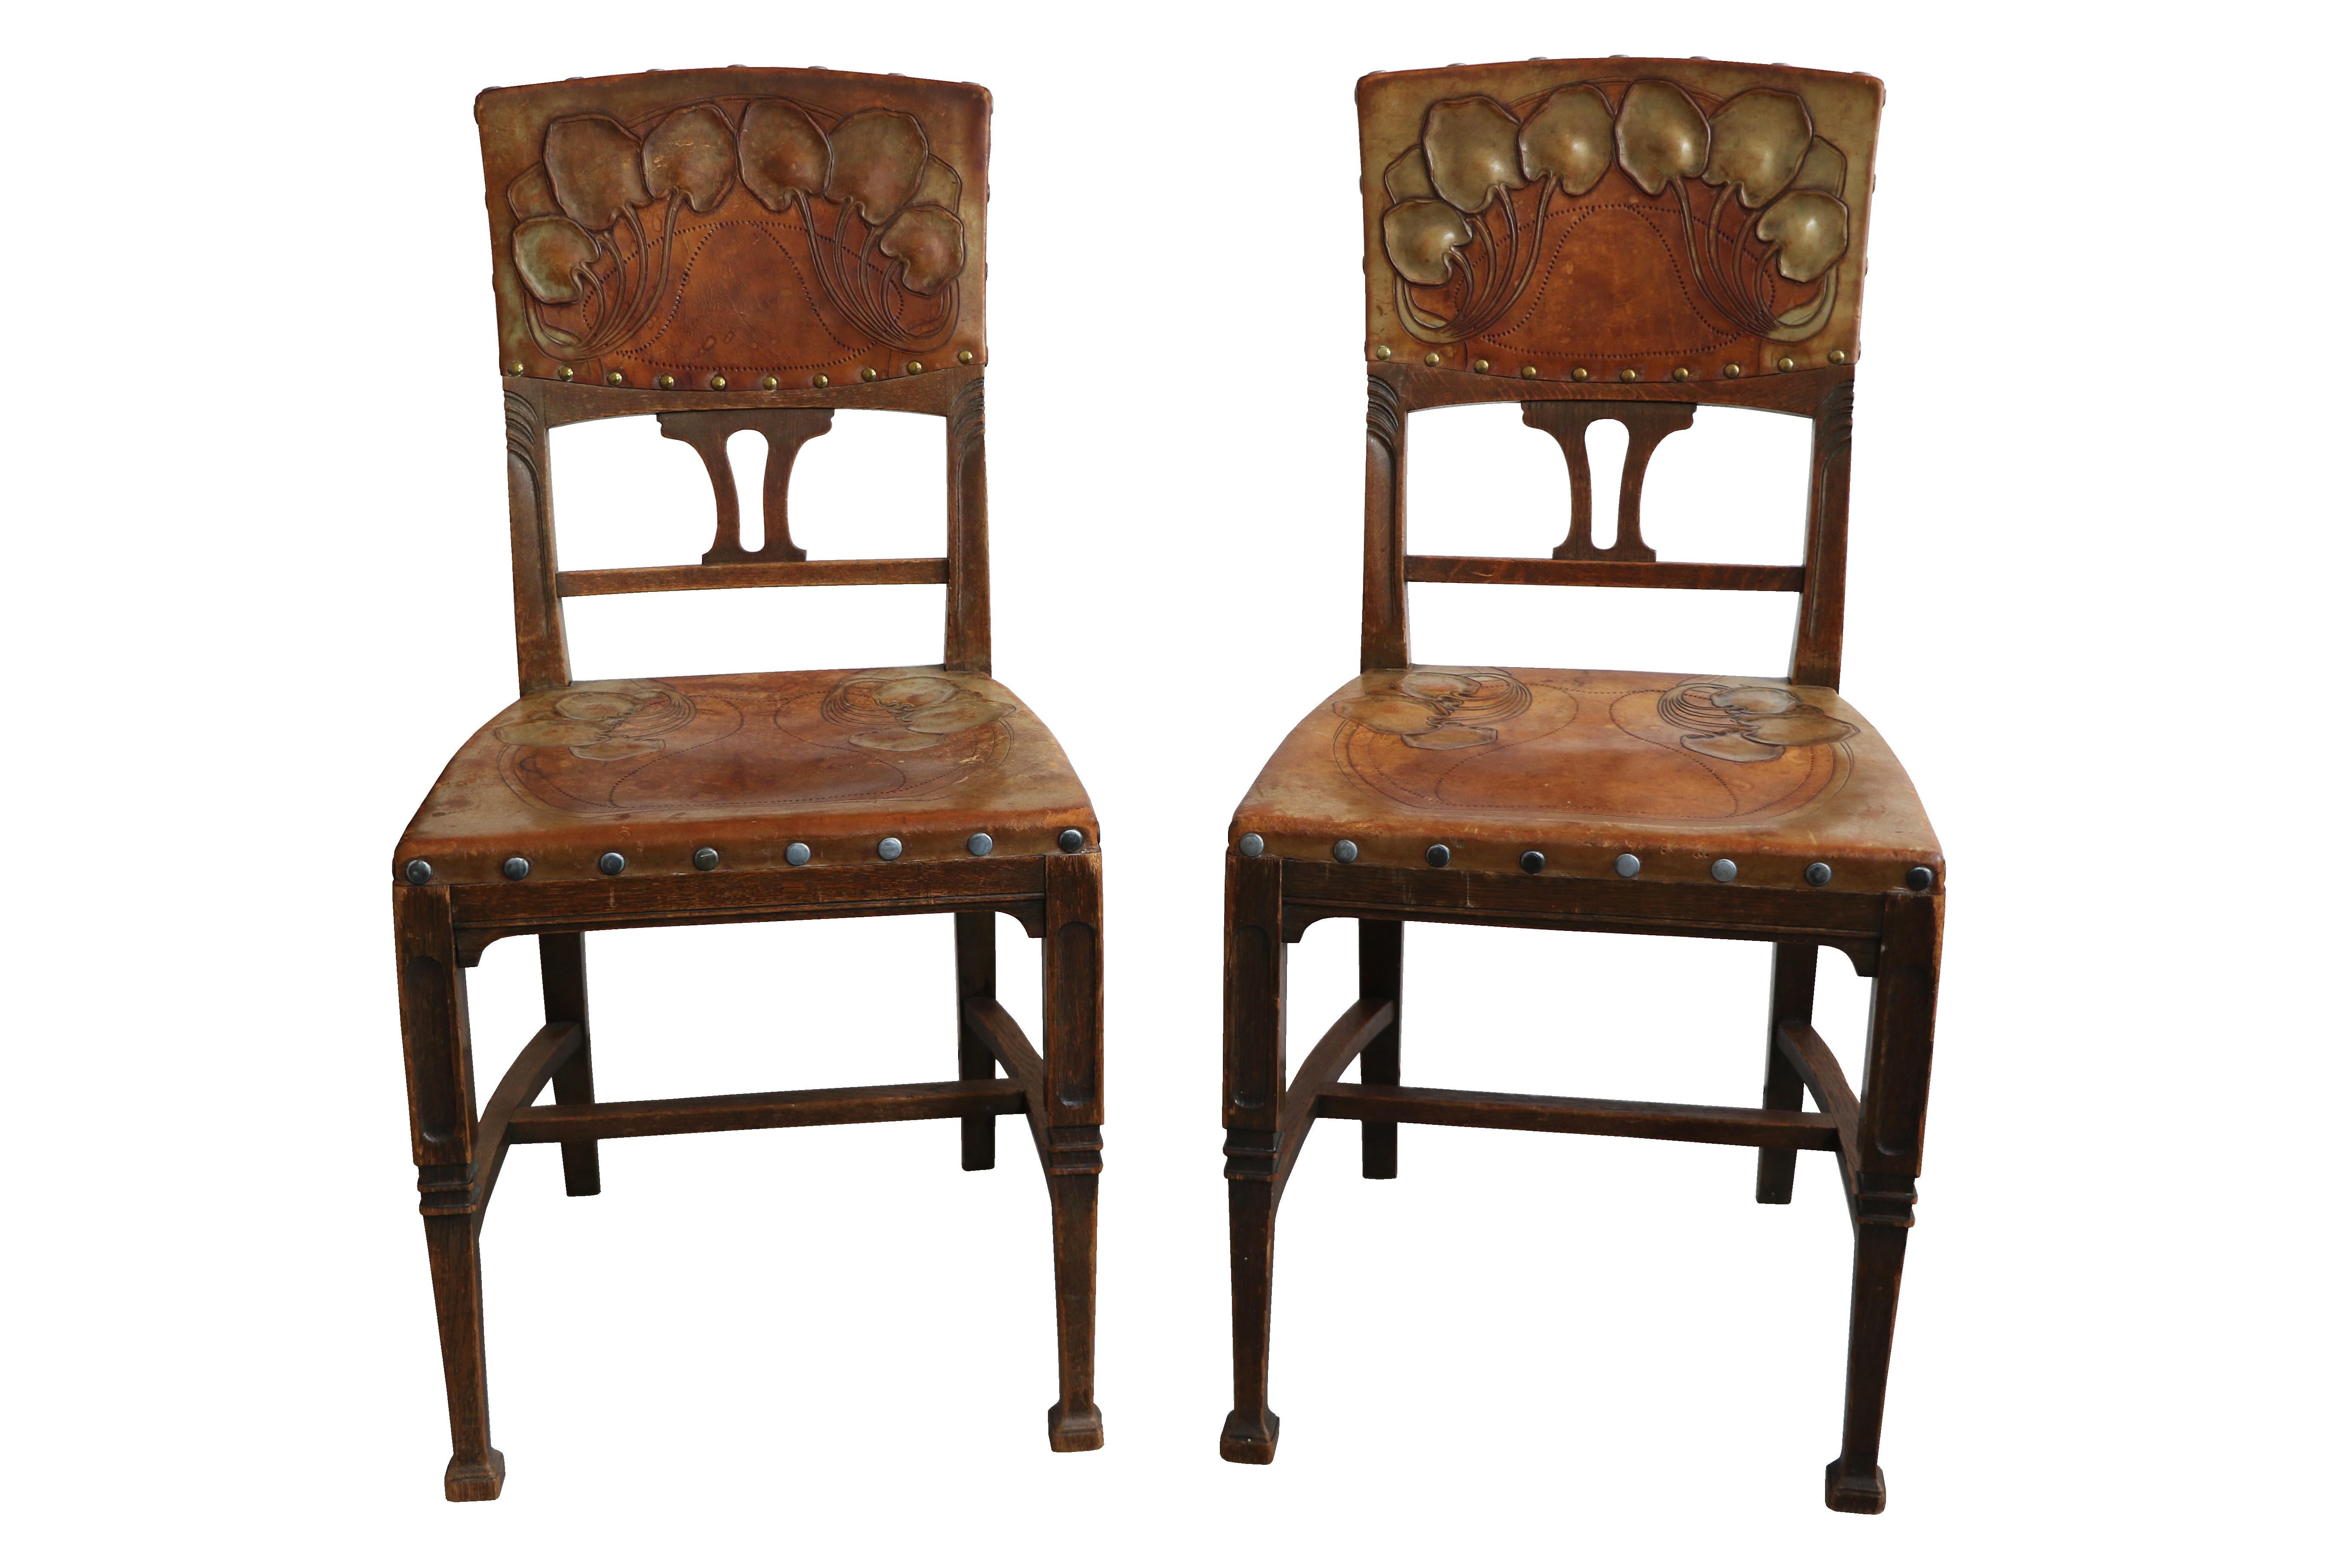 Polished Art Nouveau Set of Six Chairs in Solid Oak. Vienna, c. 1910. For Sale